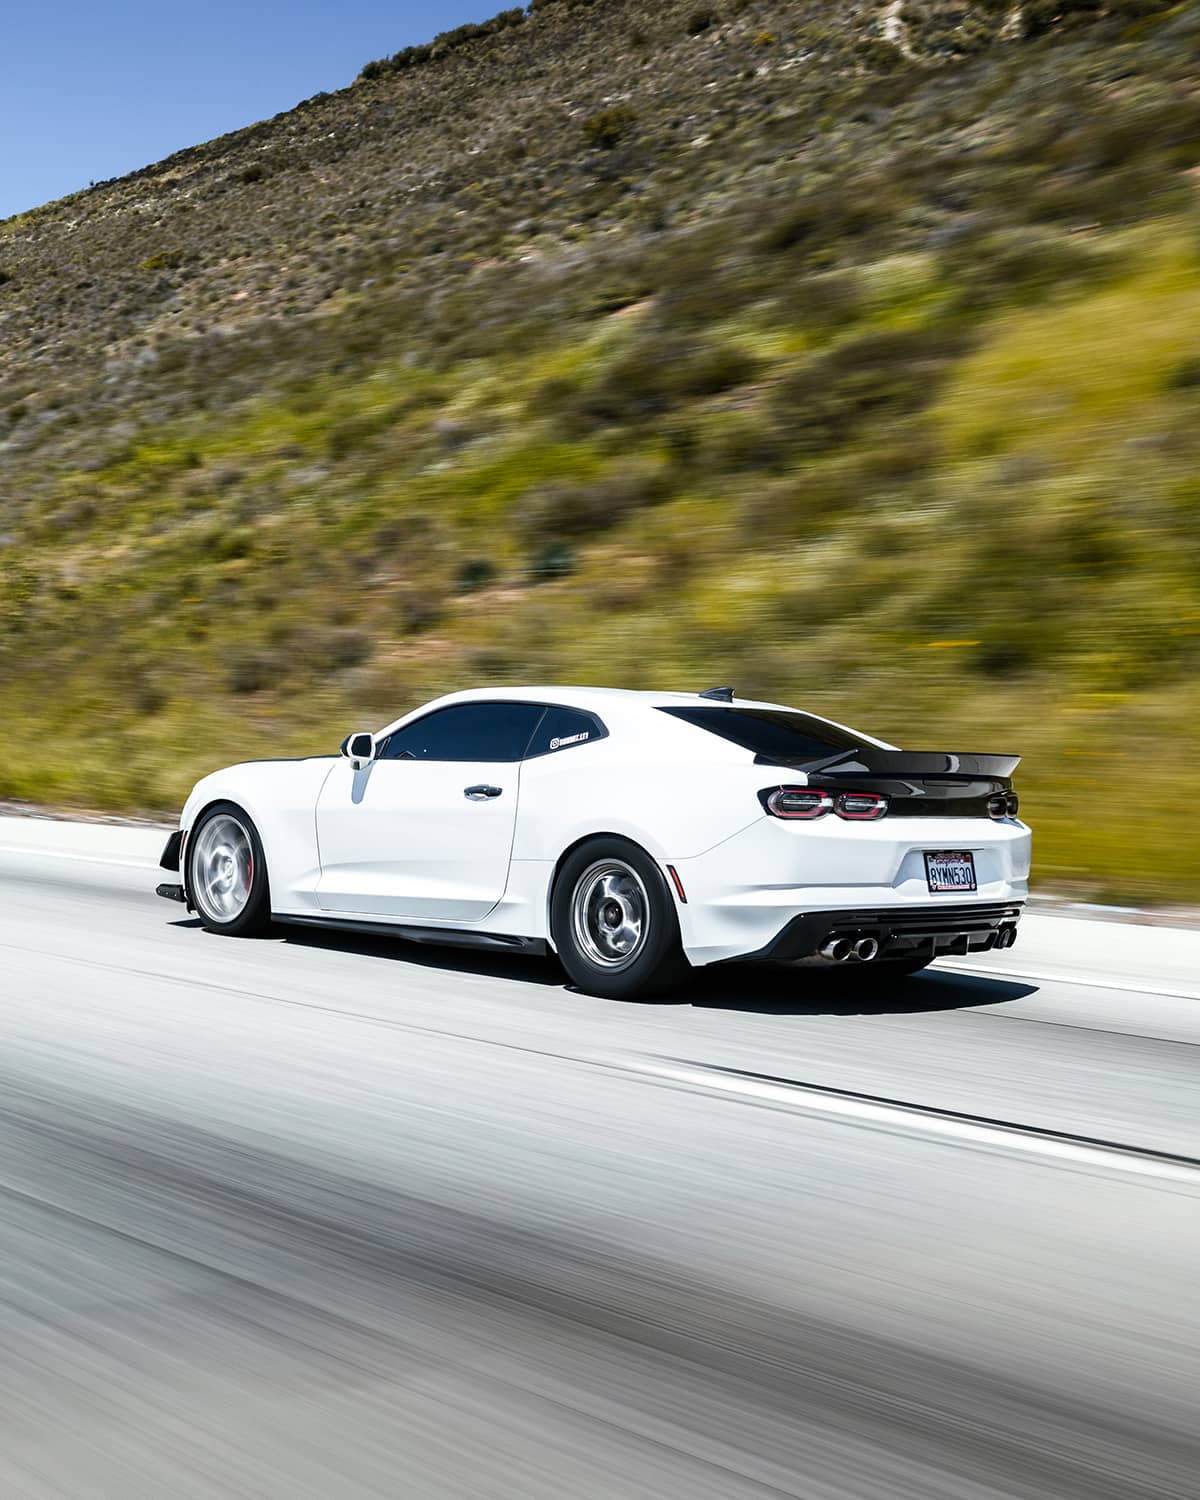 WHite Chevy Camaro LT1 Drag project build